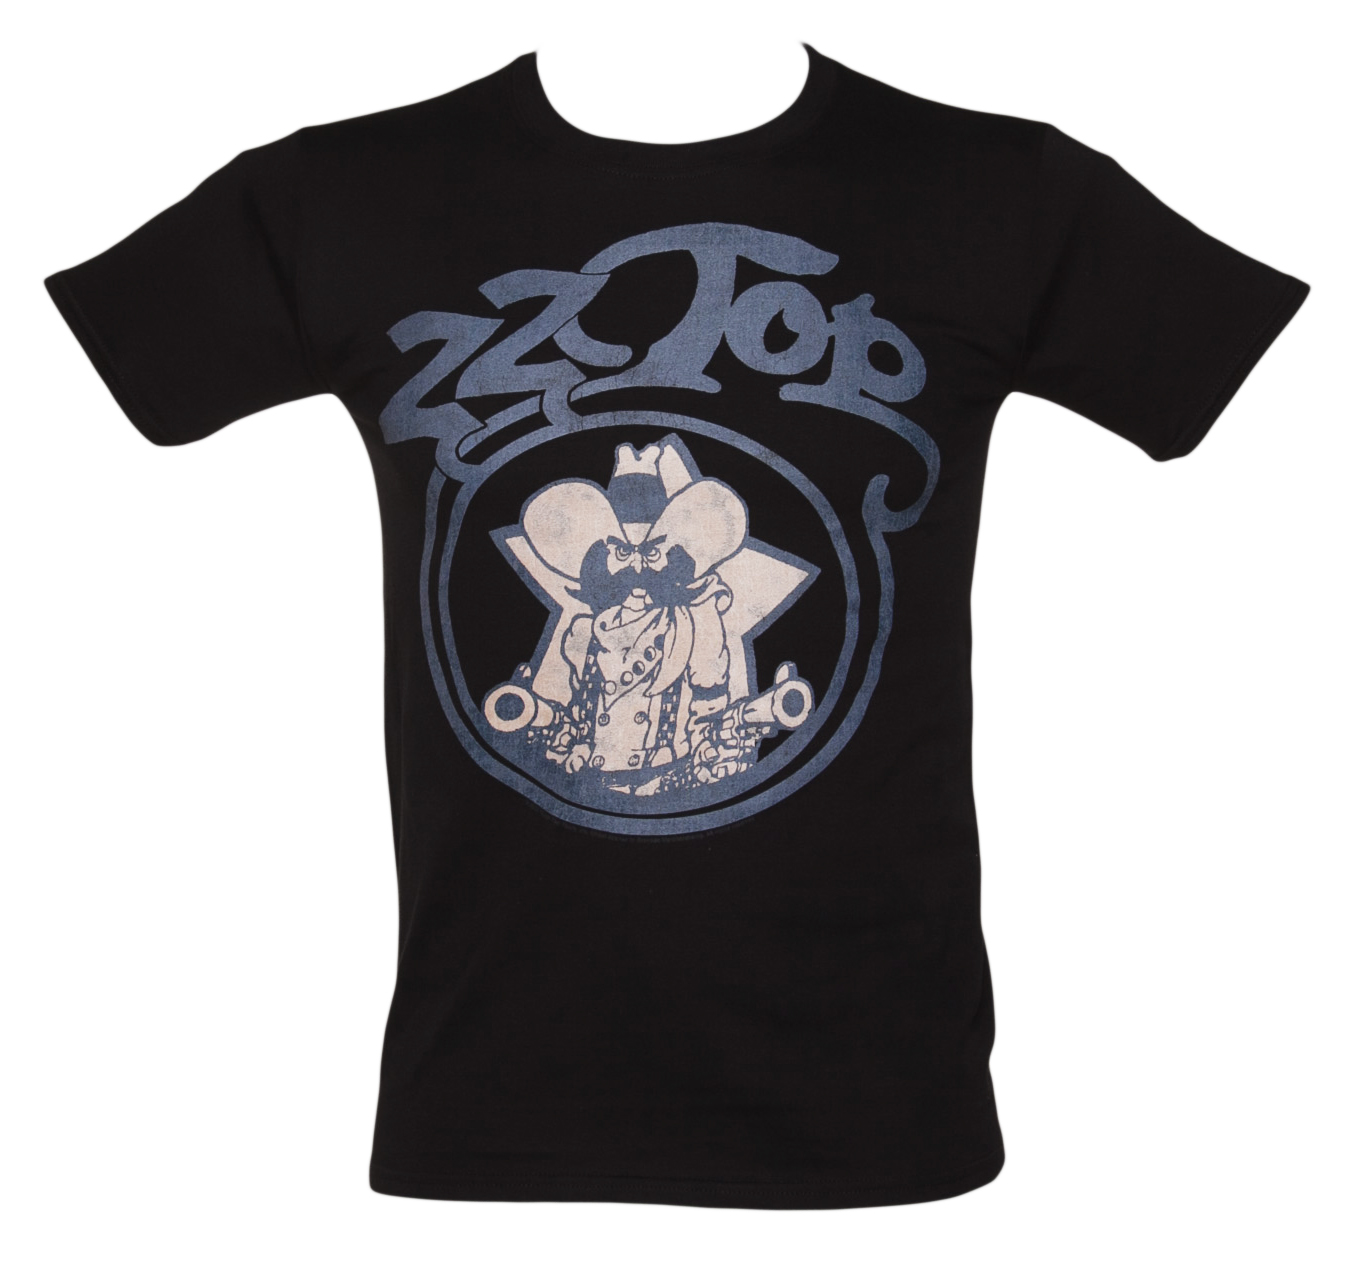 Mens ZZ Top Outlaw Vintage T-Shirt